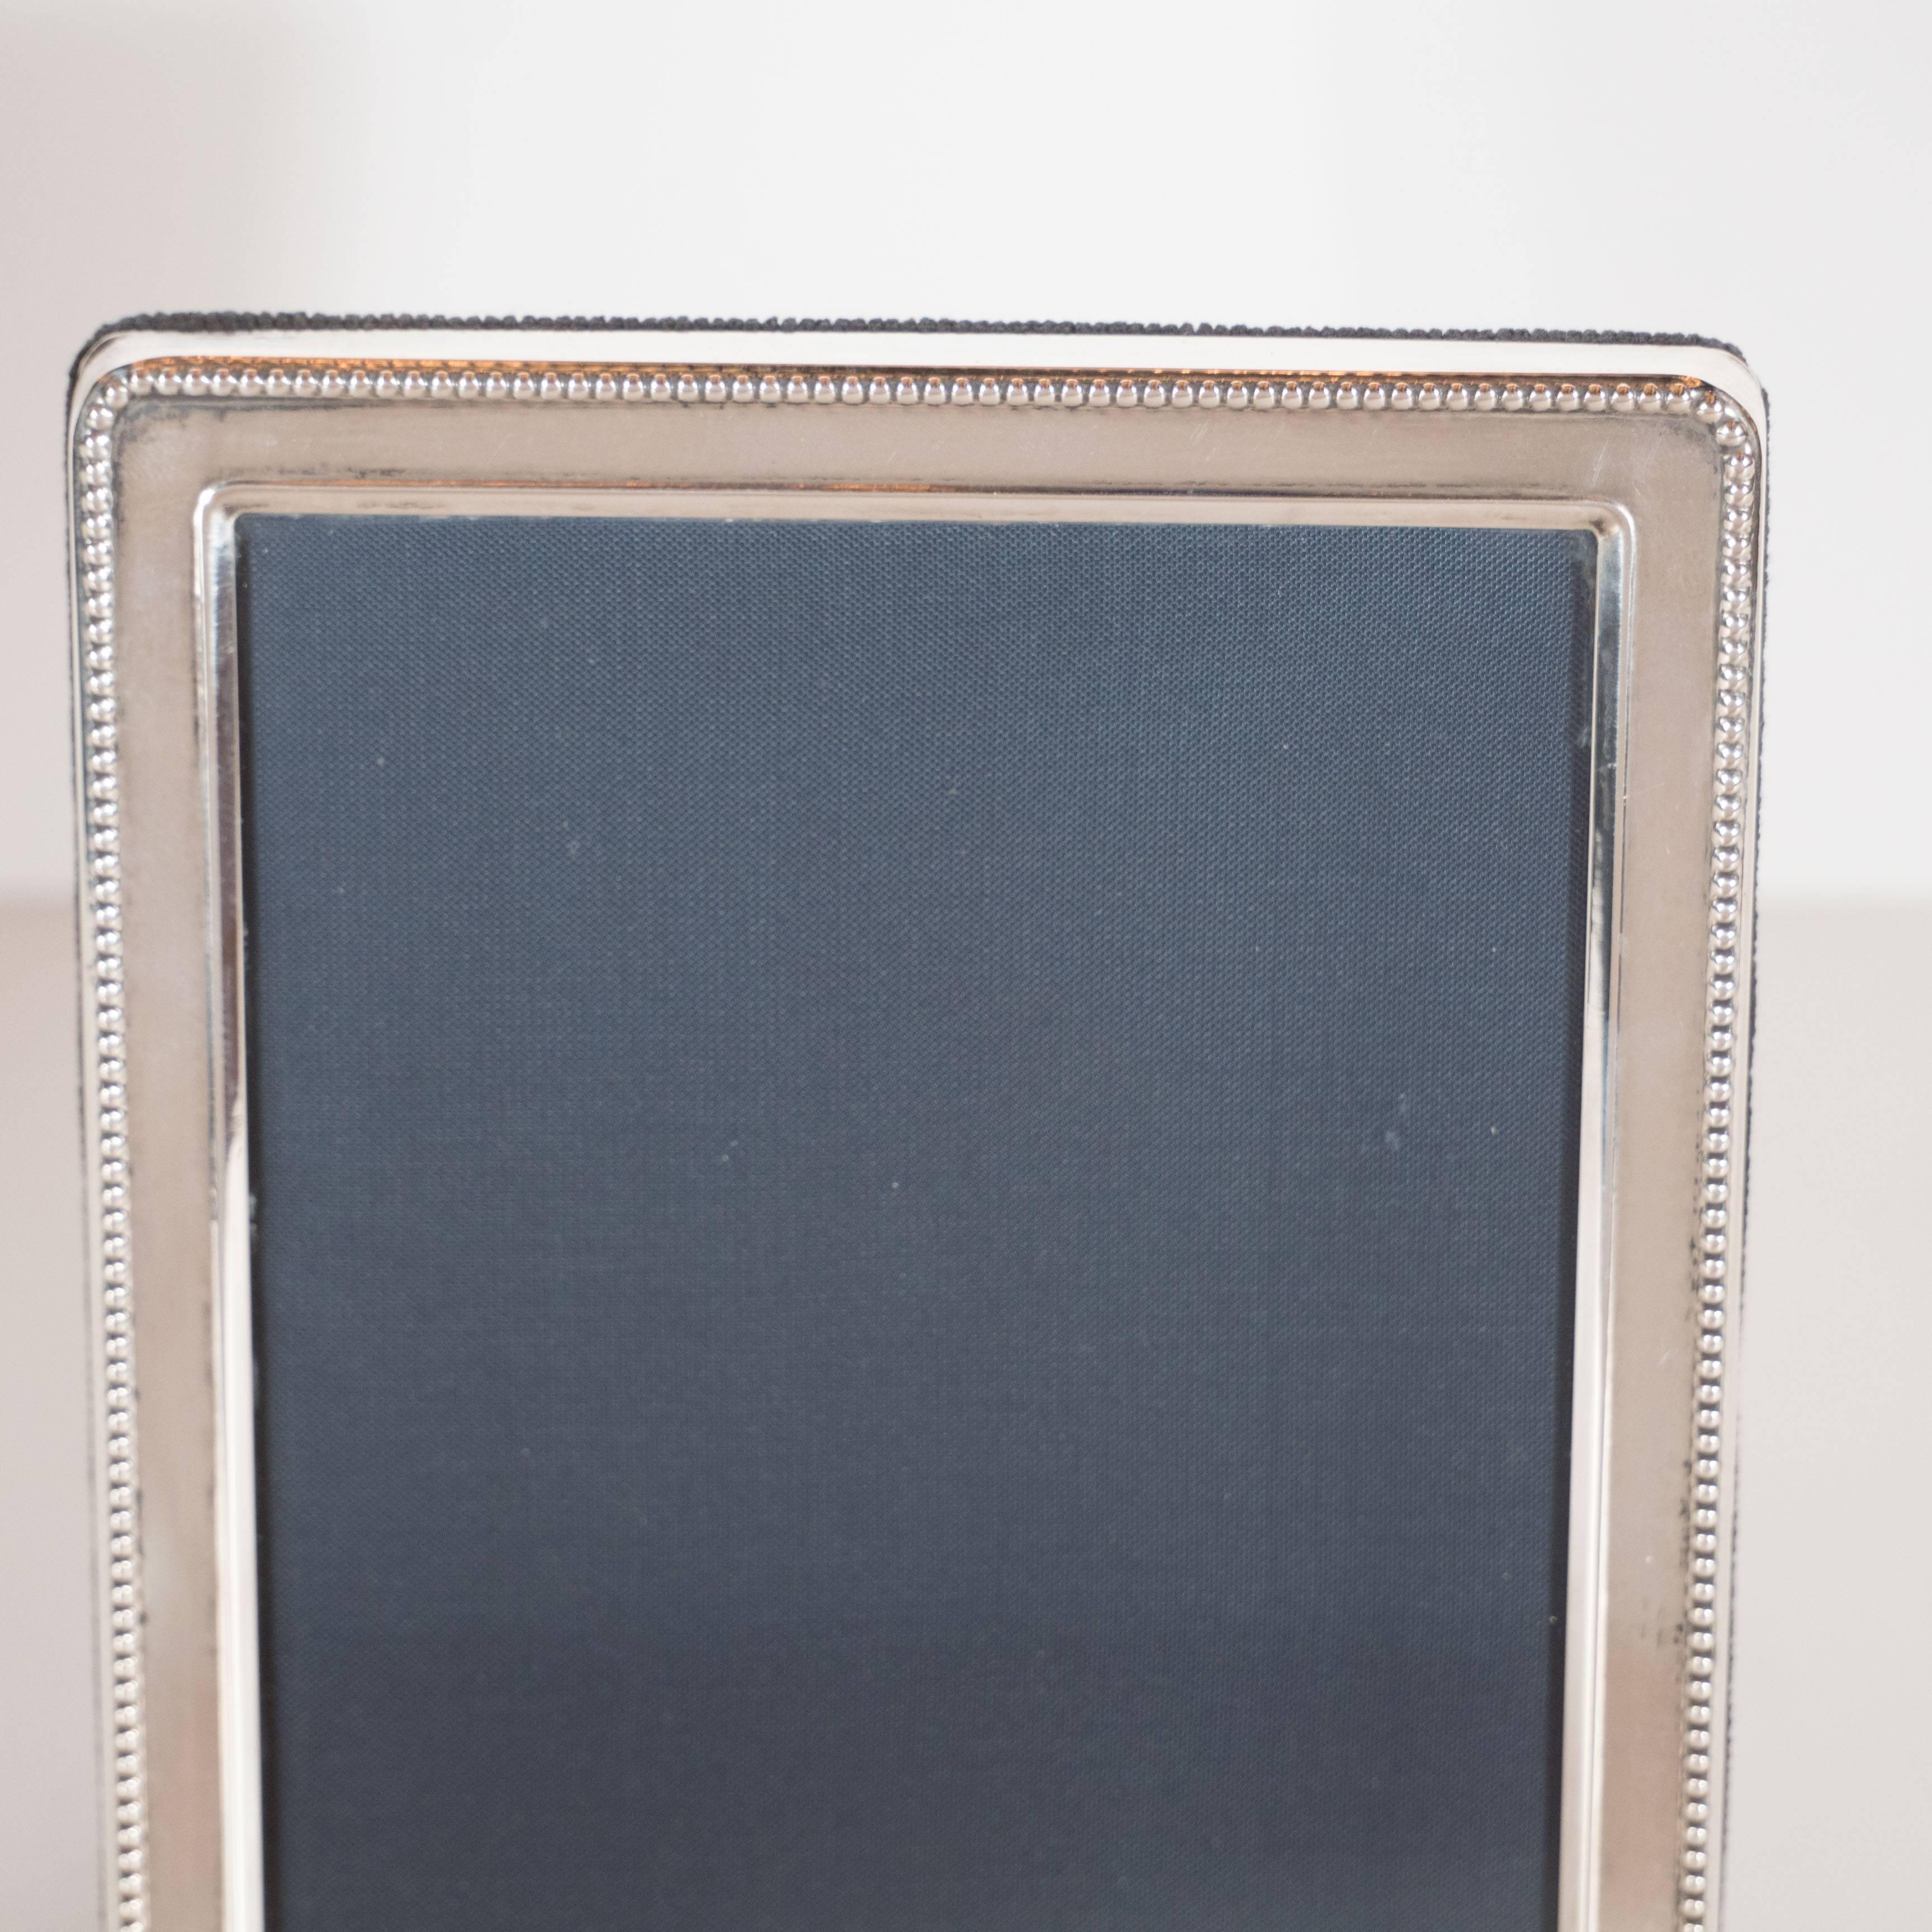 A Mid-Century Modernist sterling silver photo frame features fine beading repeating around the perimeter. The back is lined in navy felt with sterling fittings. It is designed to hold a 5" x 3.5" photo. It can be displayed either